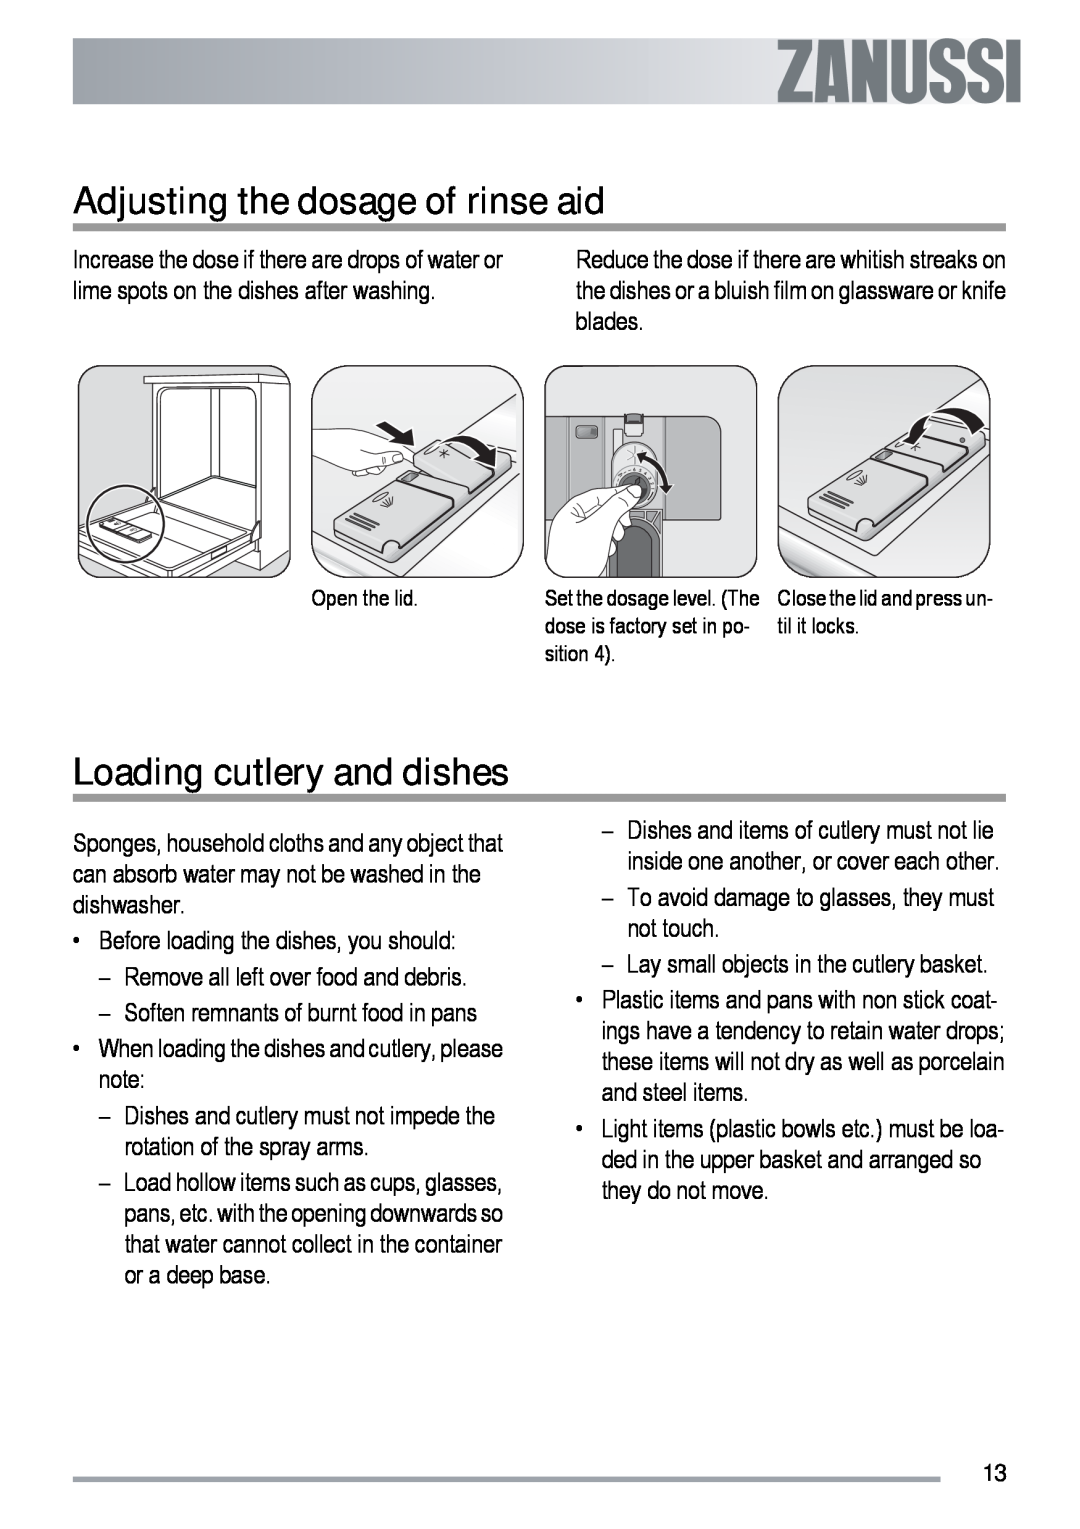 Zanussi ZDF 312 user manual Adjusting the dosage of rinse aid, Loading cutlery and dishes 